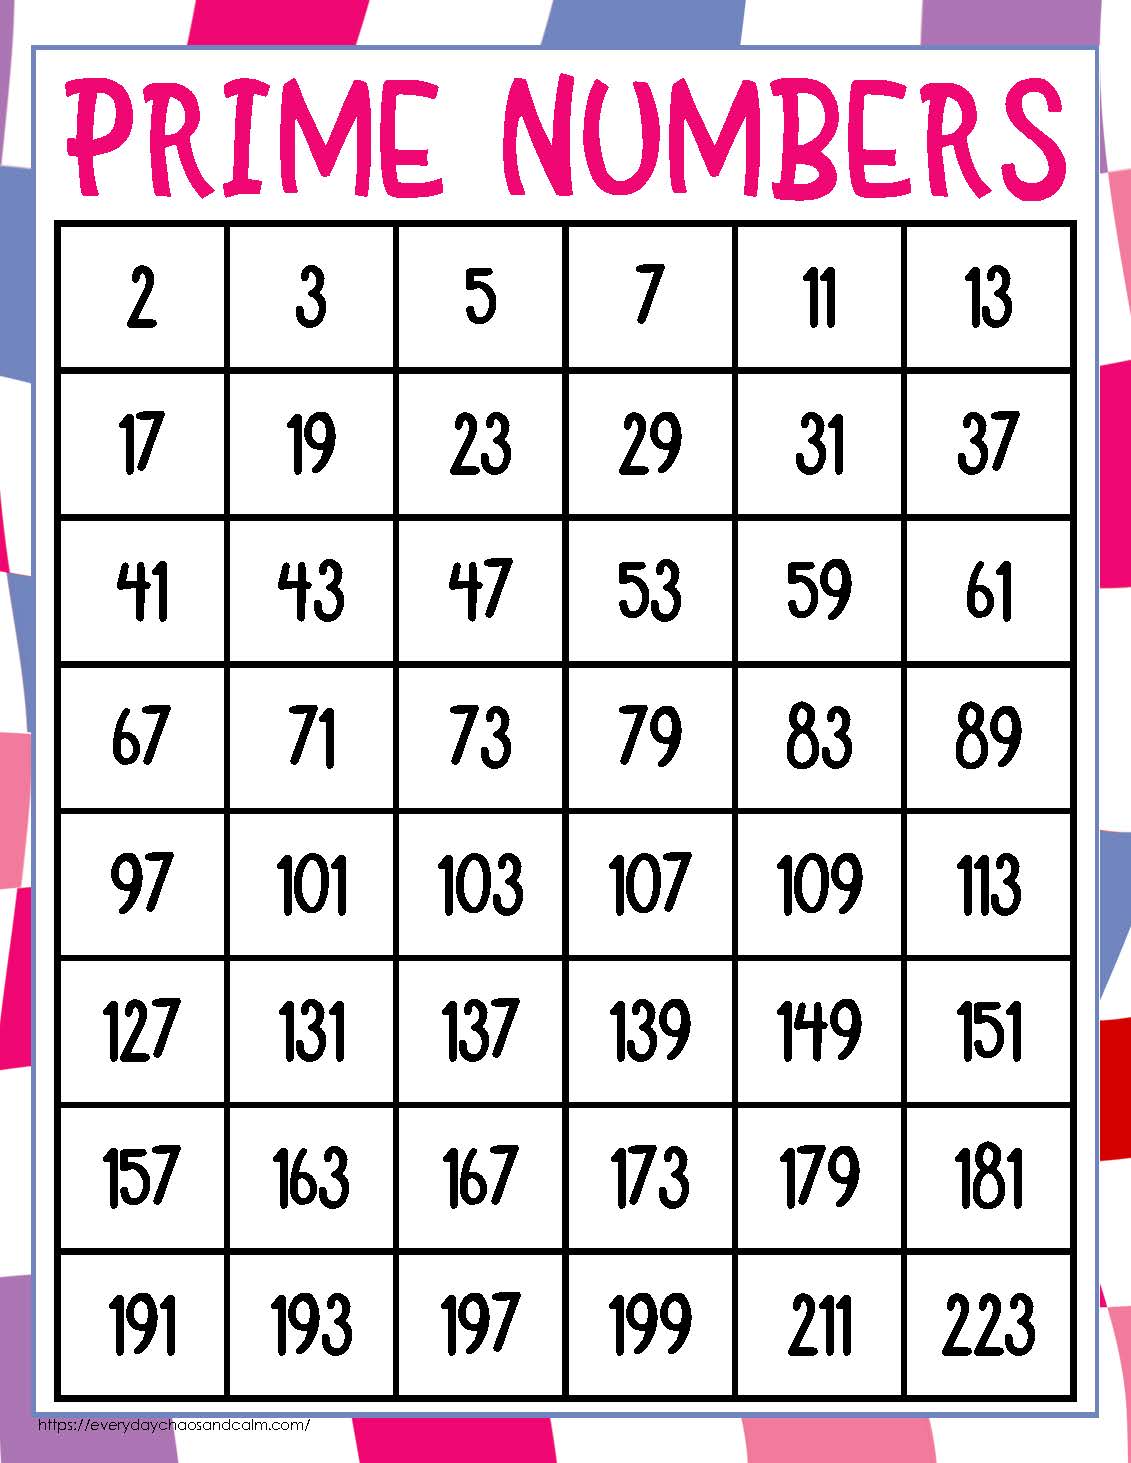 printable prime number charts, PDF, instant download, elementary, educational tool